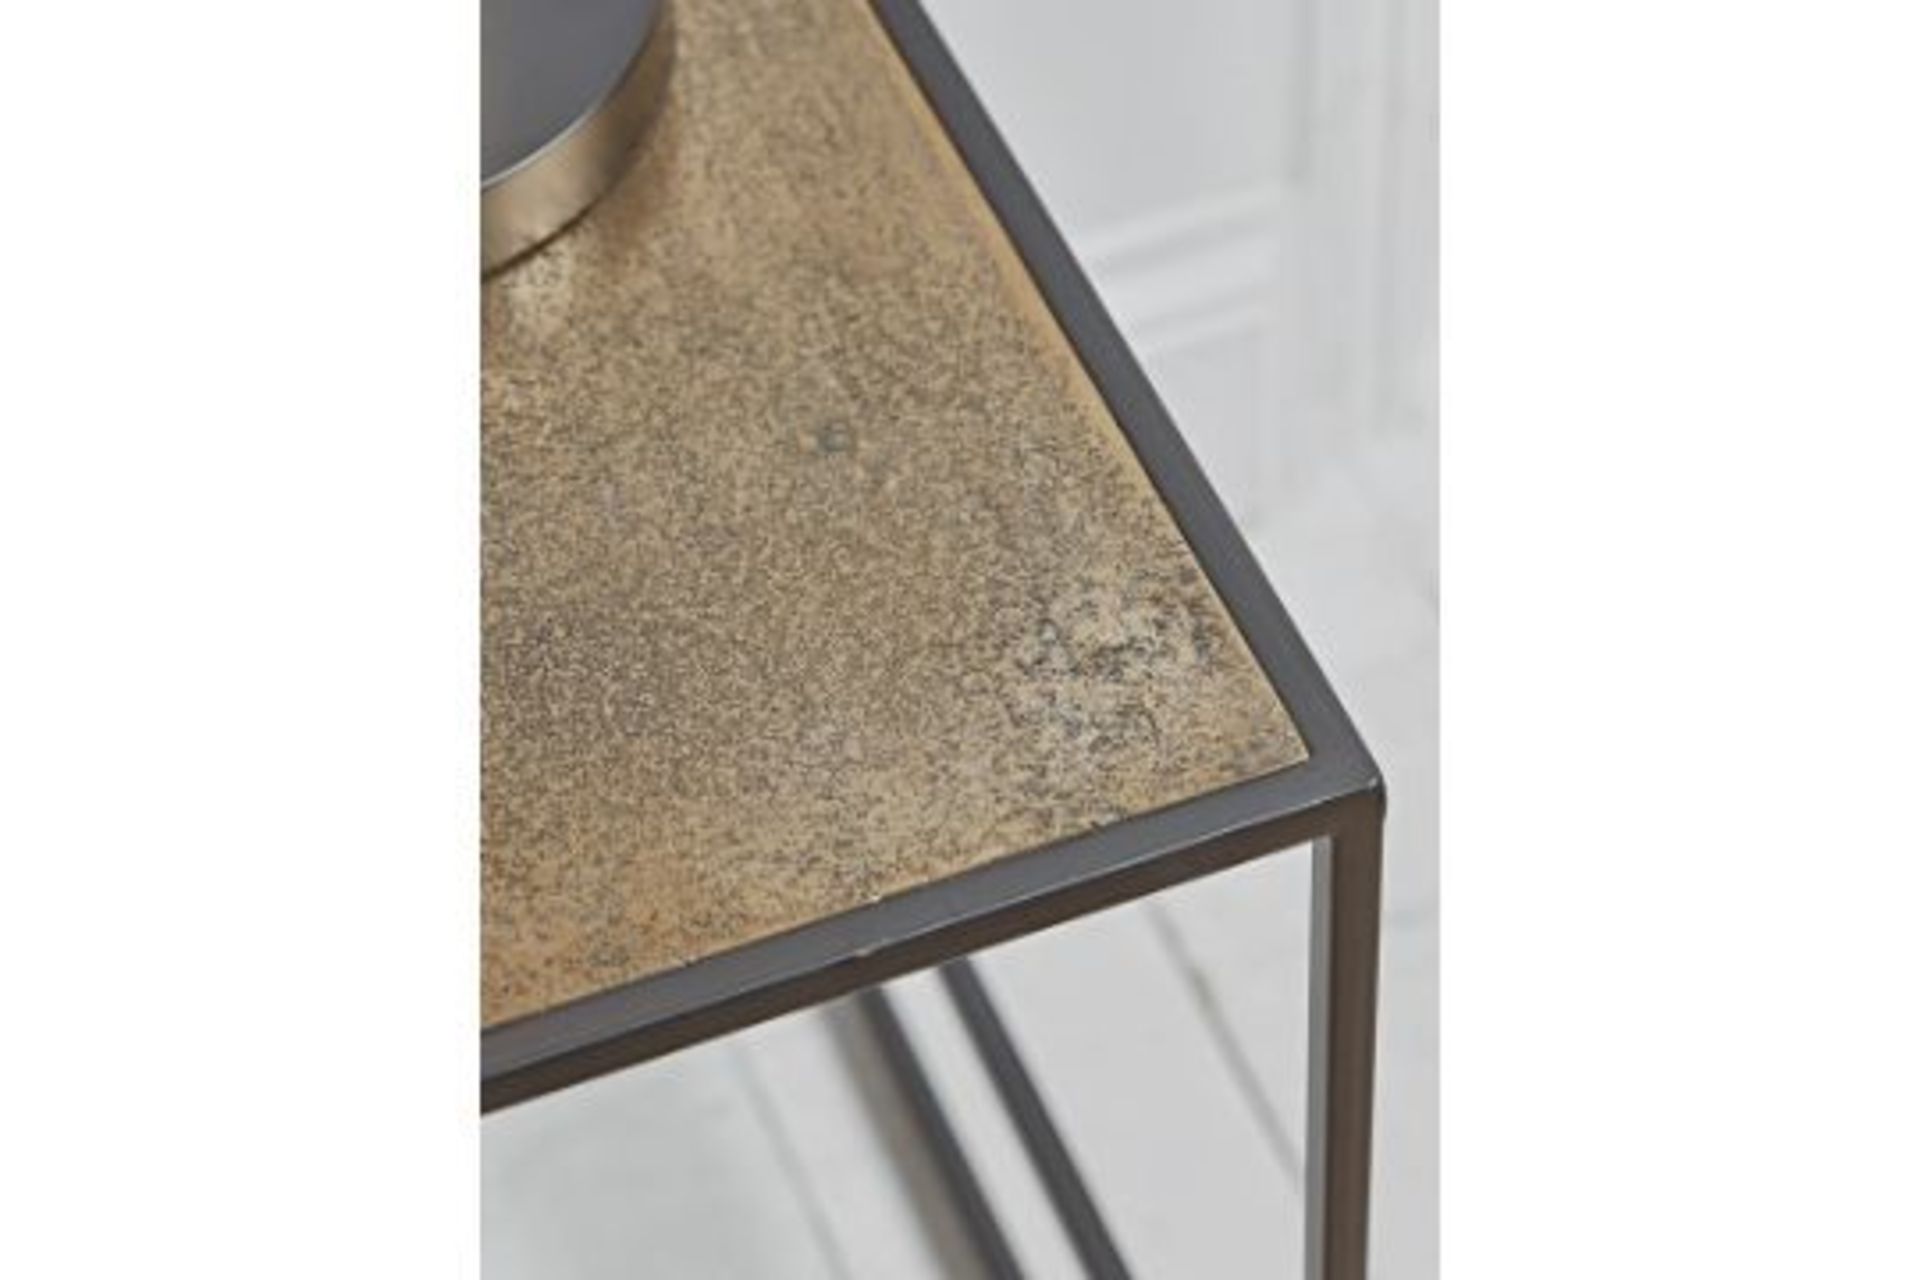 Cox & Cox Textured Topped Metal Bedside Table - RRP £275.00 (SMALL CHIP IN CORNER) COLLECTION ONLY - Image 3 of 4